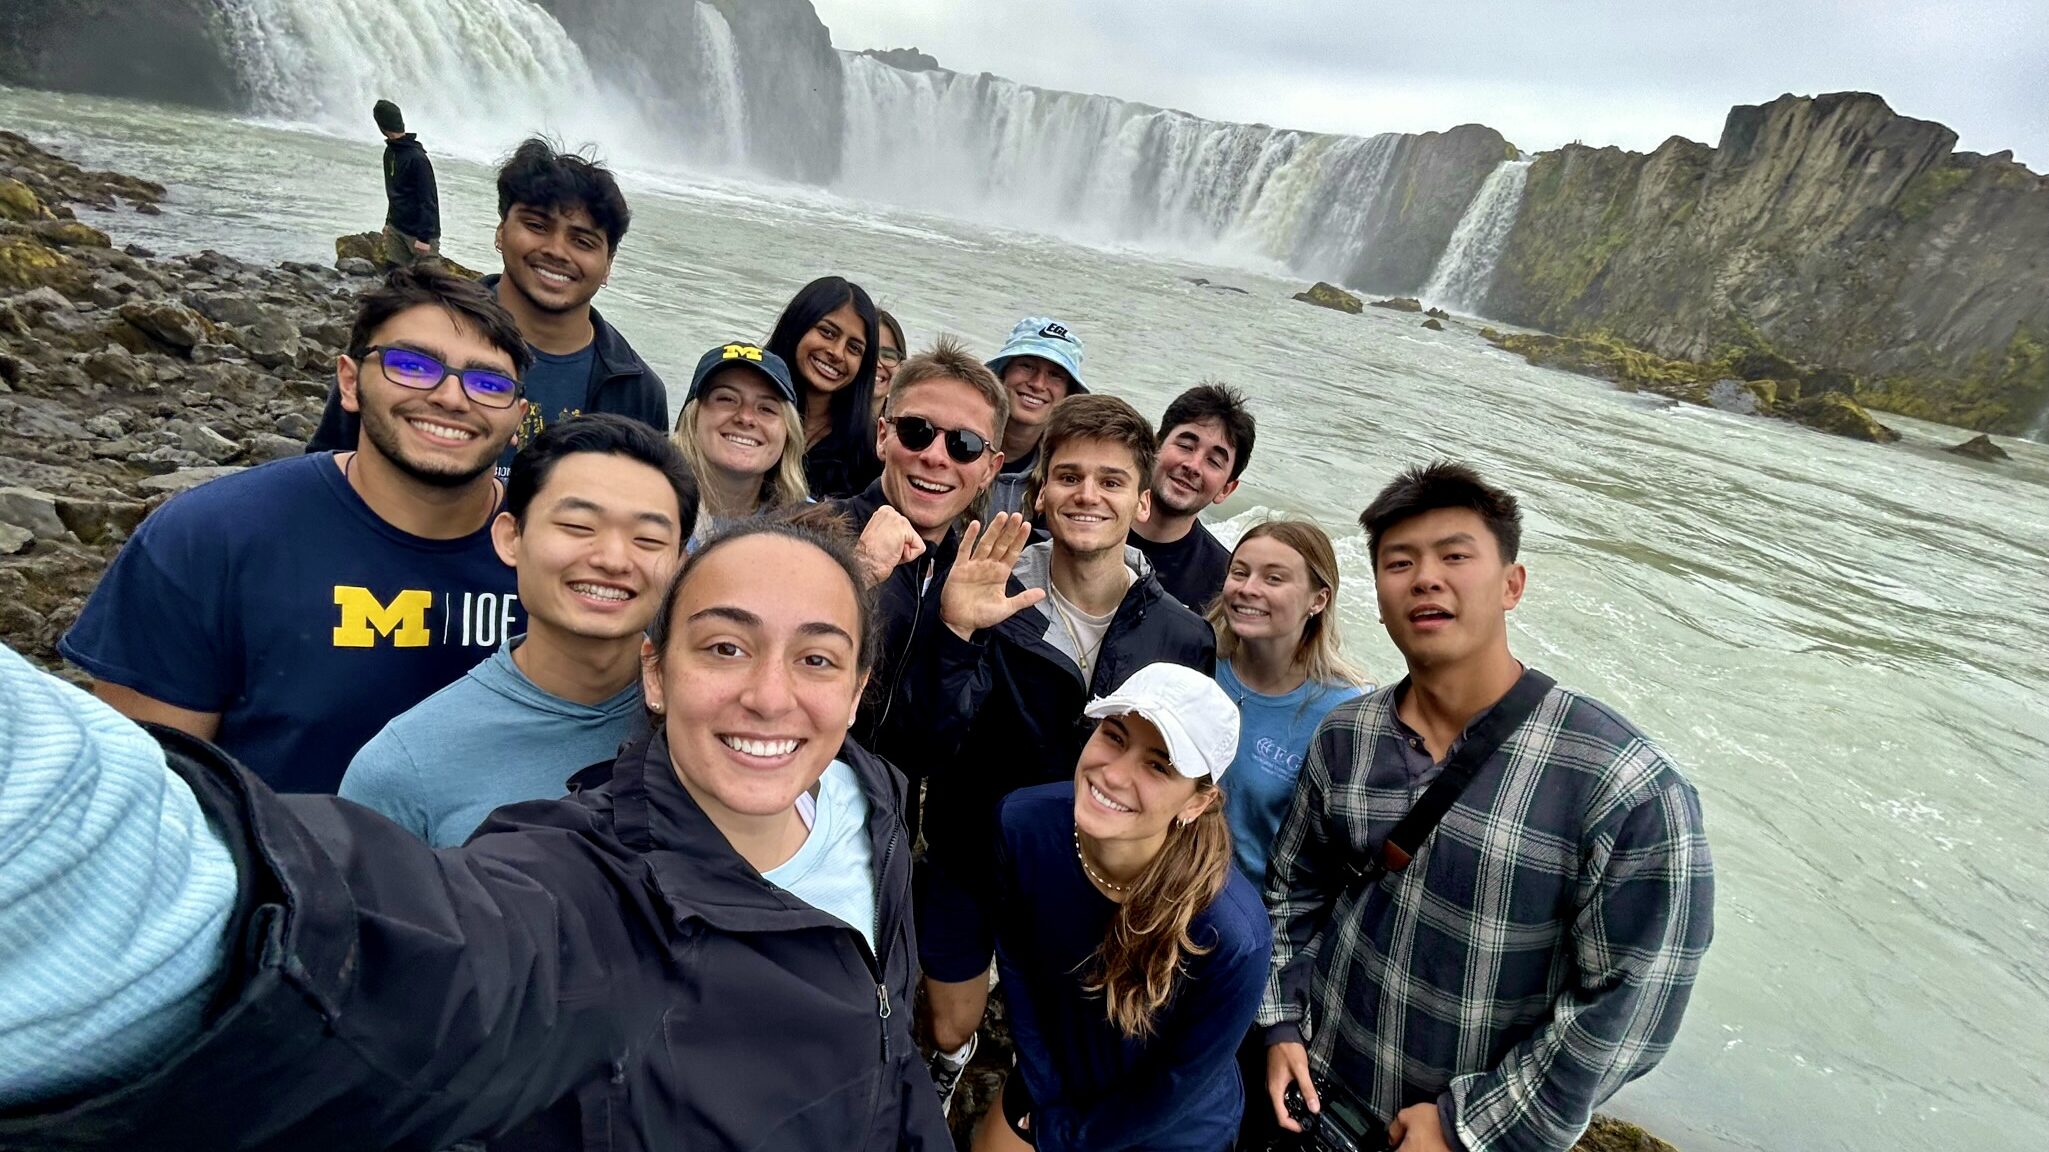 A student takes a selfie of herself and 13 other people in front of a large waterfall and pool of water.